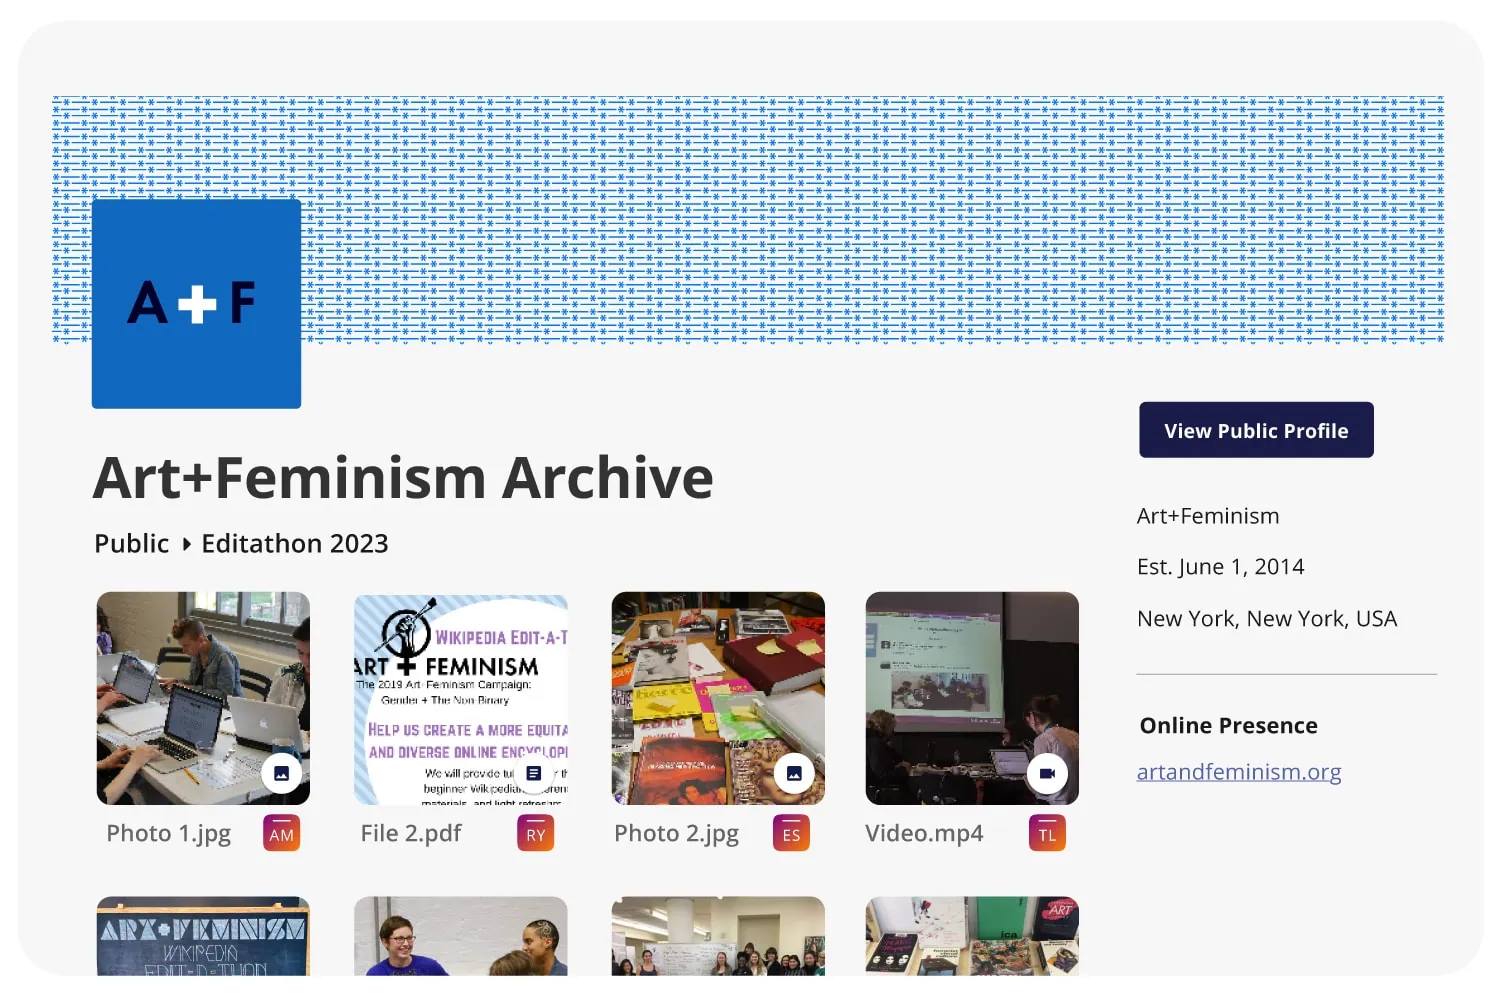 Art + Feminism public archive of files from an Edit-a-thon.